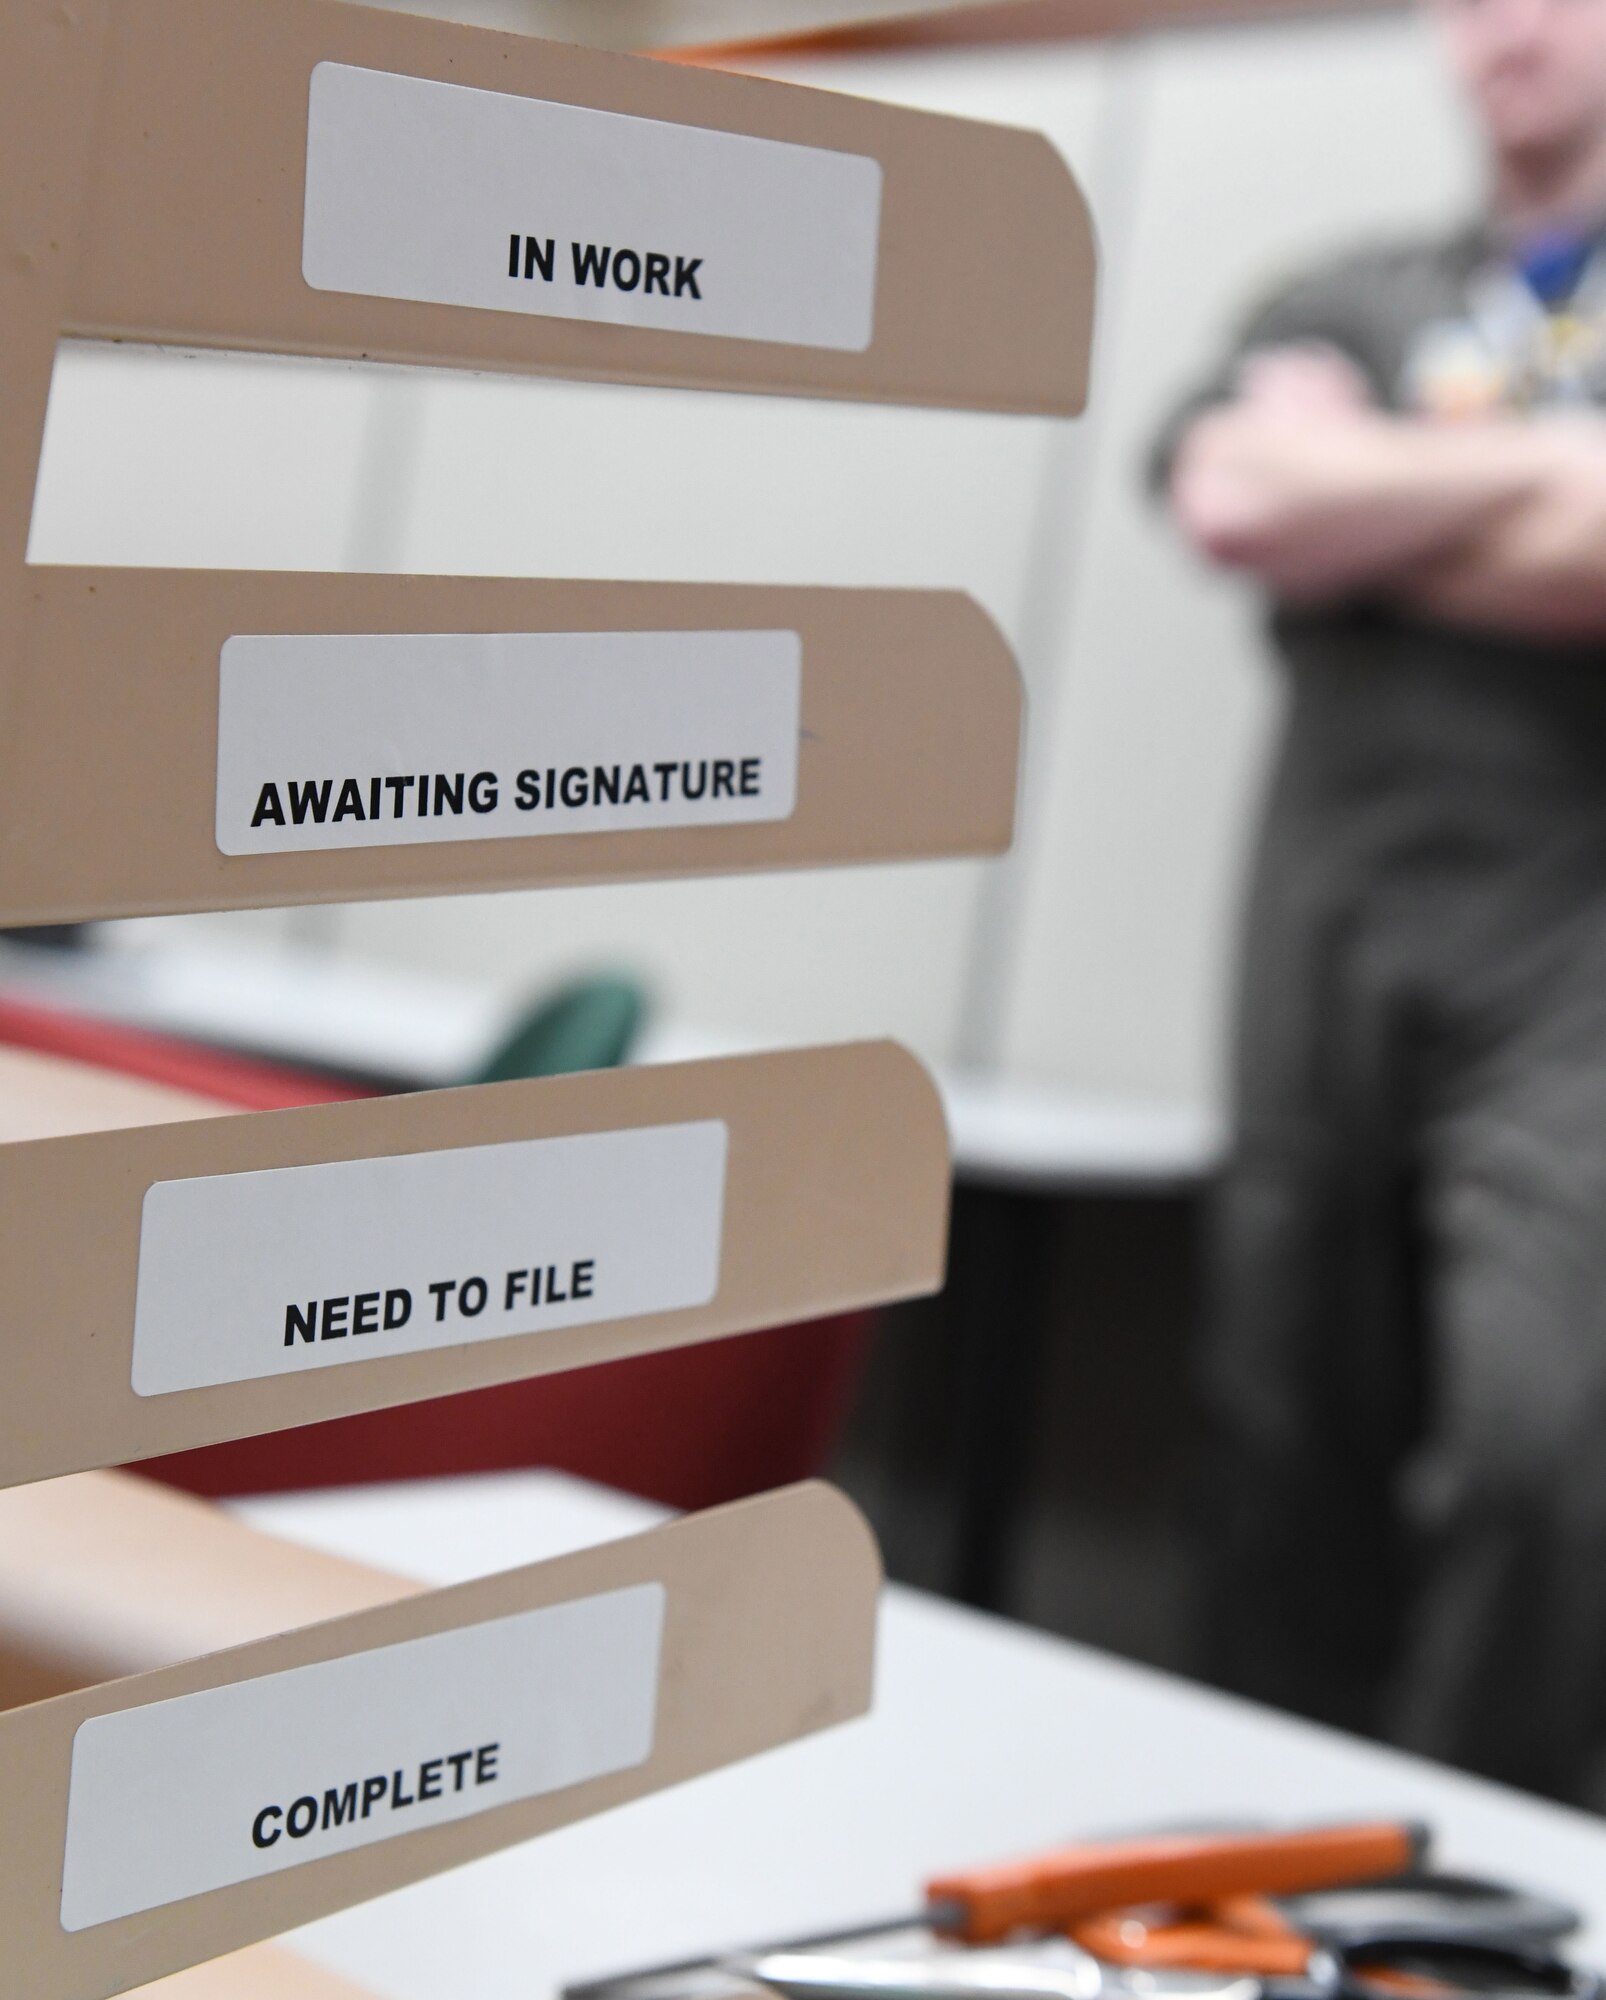 A shelf is labeled with organizational stickers in preparation for tax season at Ellsworth Air Force Base, S.D., Feb. 1, 2019. The tax center is open to help base members, retirees and military families with their 2018 tax forms for free. (U.S. Air Force photo by Airmen 1st Class Thomas Karol)